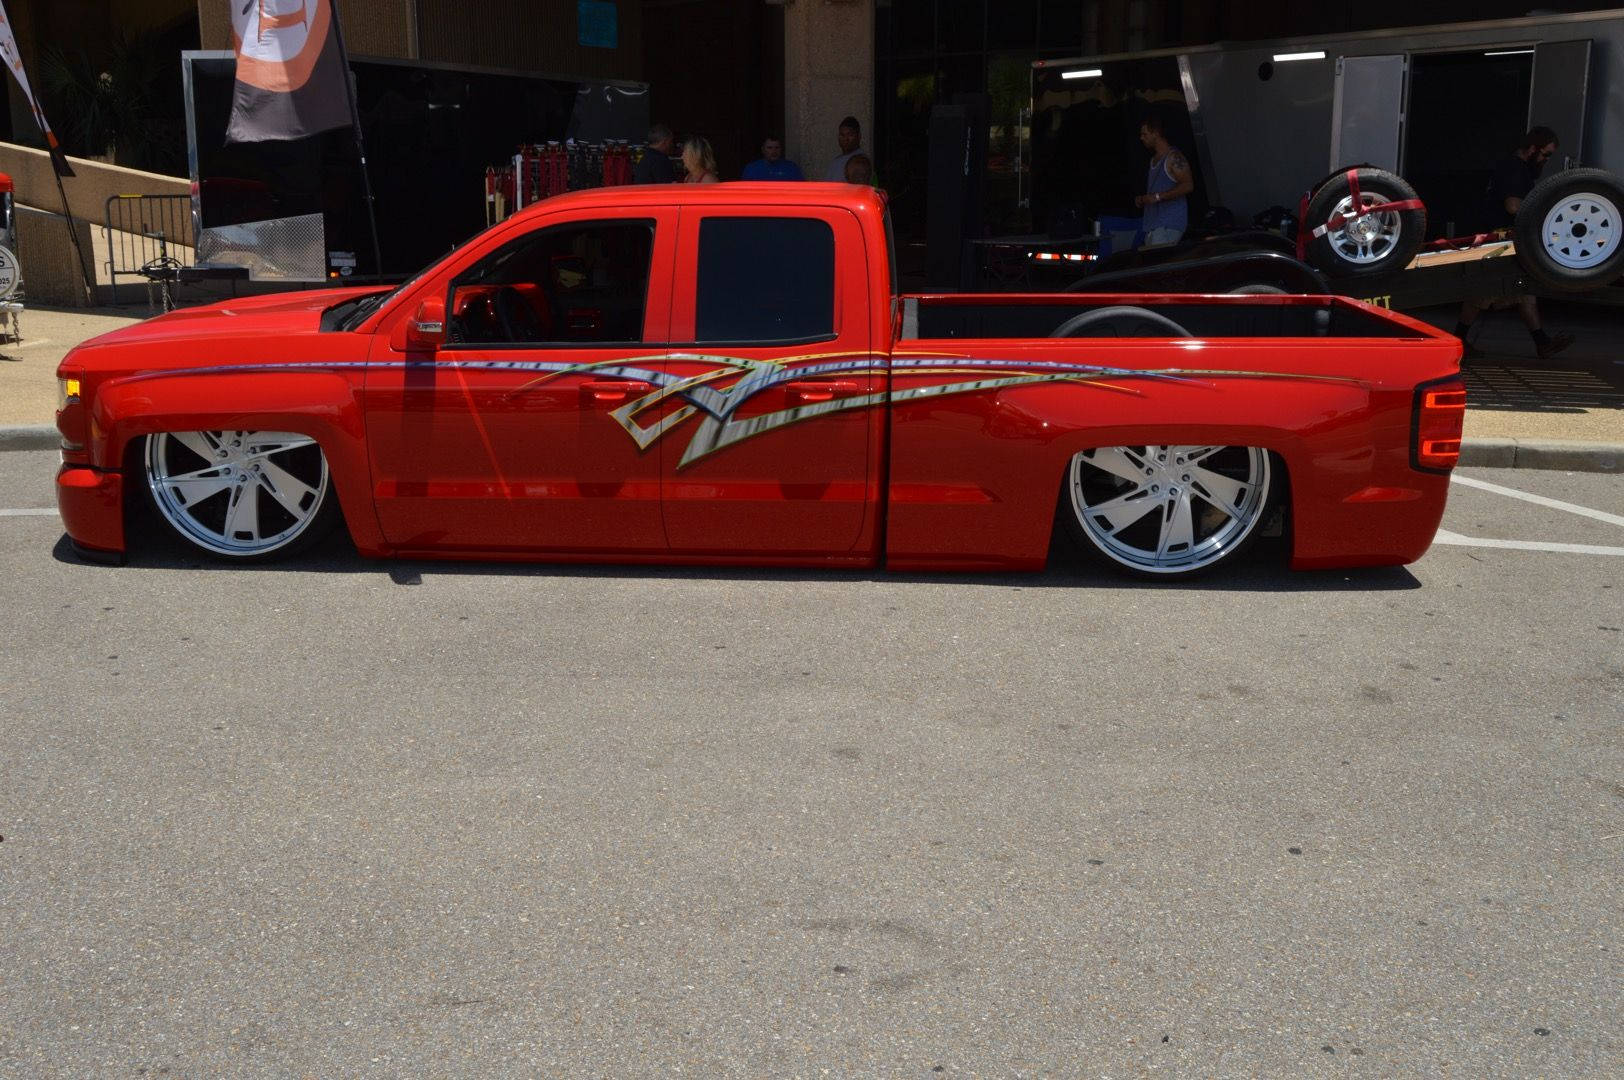 Super Low Red Dropped Truck